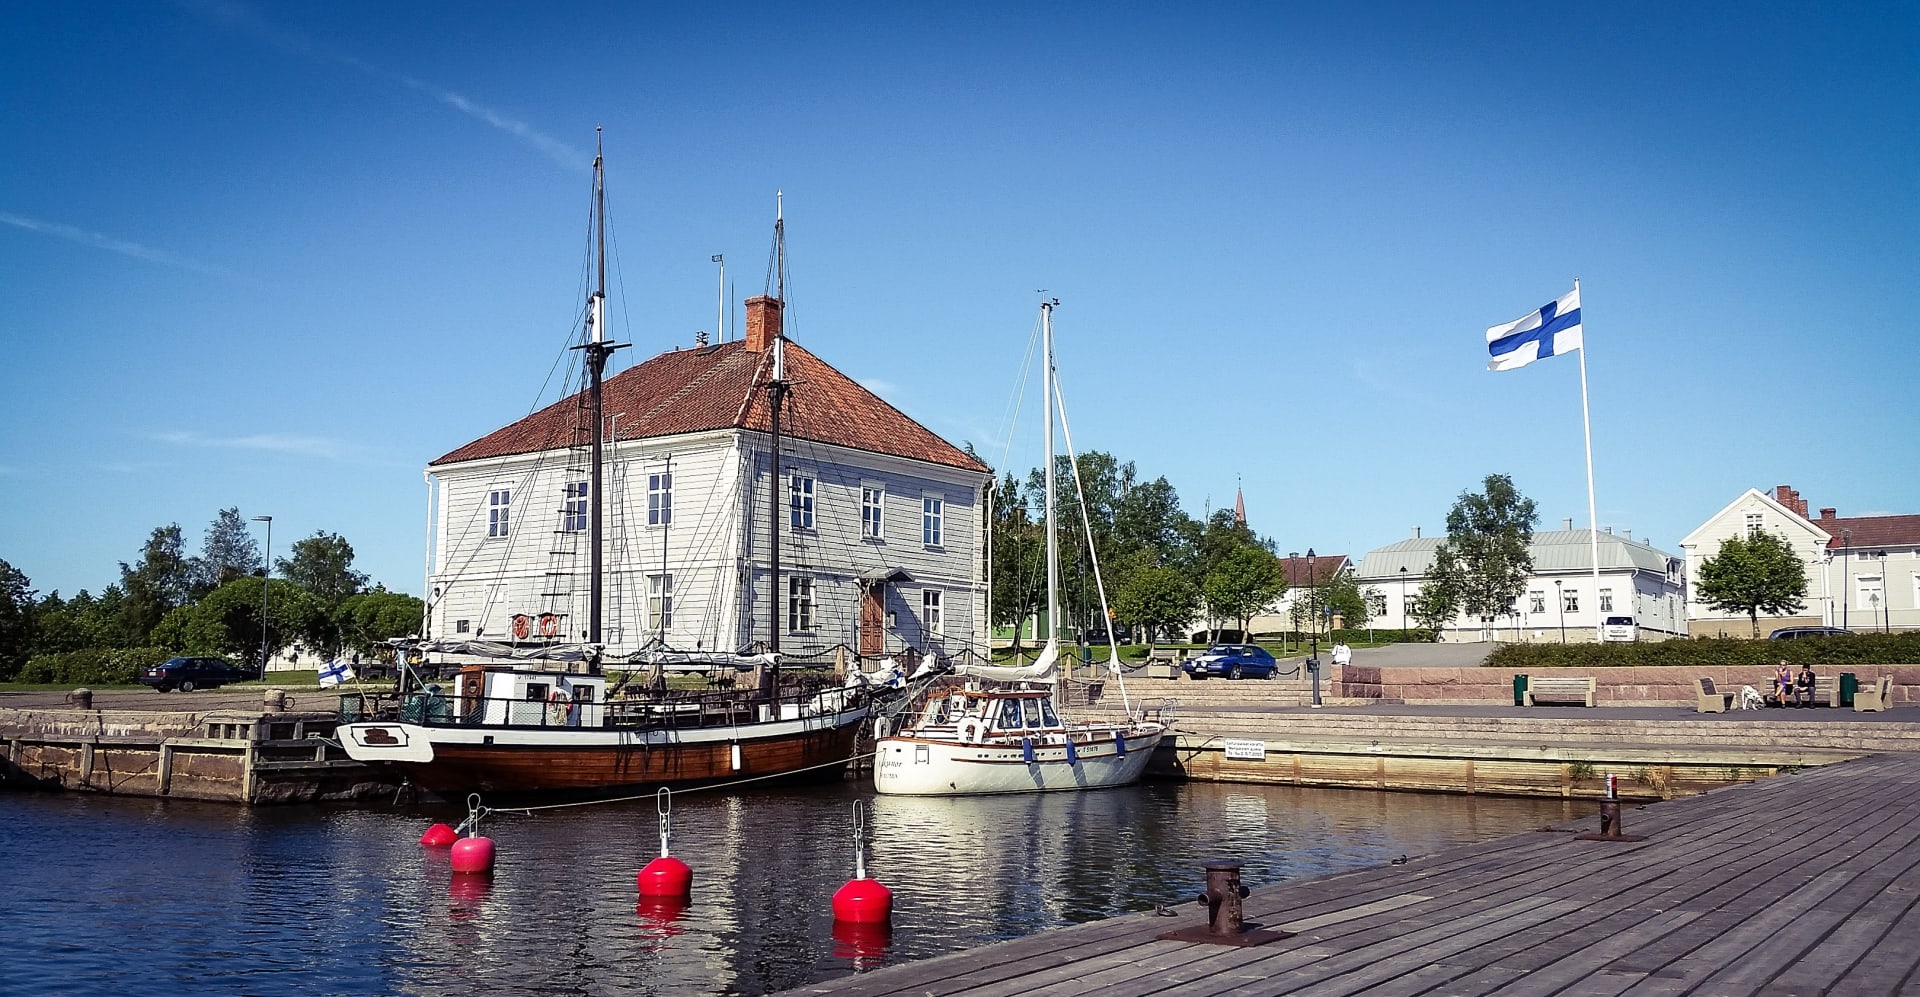 Cruises to Raahe Archipelago leave from the harbor next to the Packhouse Museum.